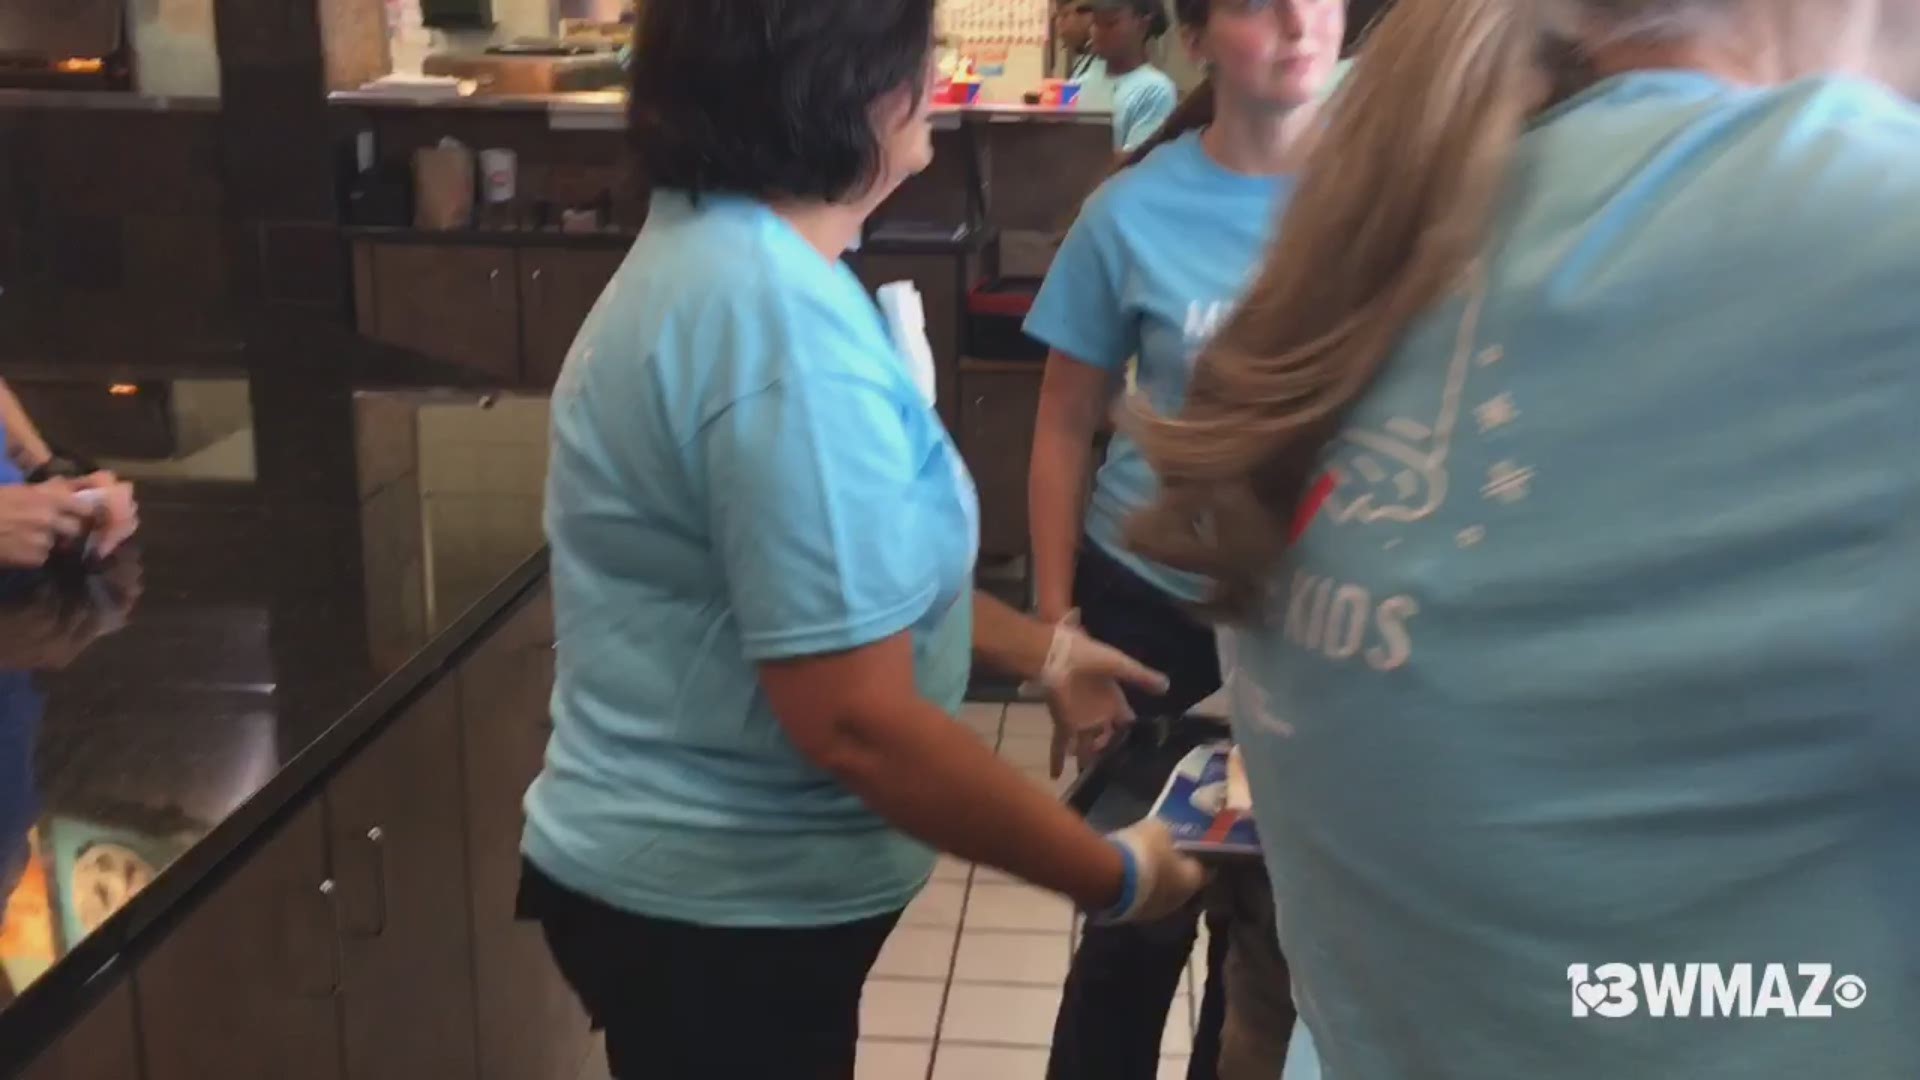 Everyone's working hard at Dairy Queen in Forsyth for Miracle Treat Day to benefit Beverly Knight Olsen Children's Hospital. Watch Charlee serve up food.